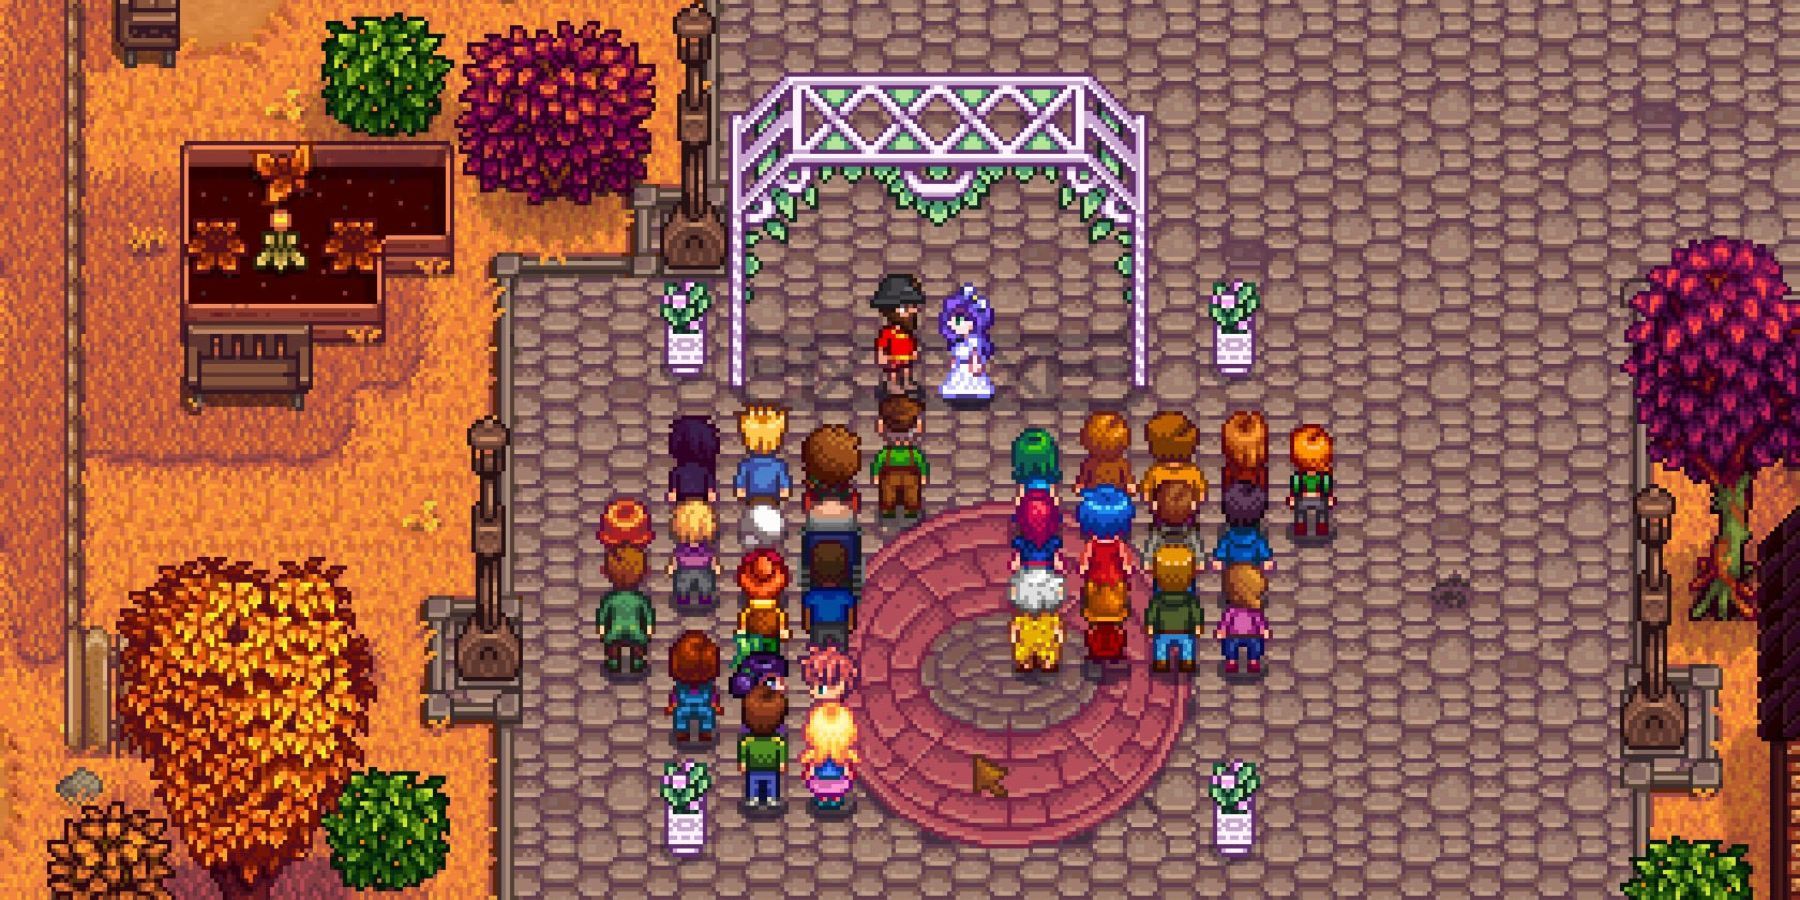 marriage ceremony taking place in Stardew Valley.